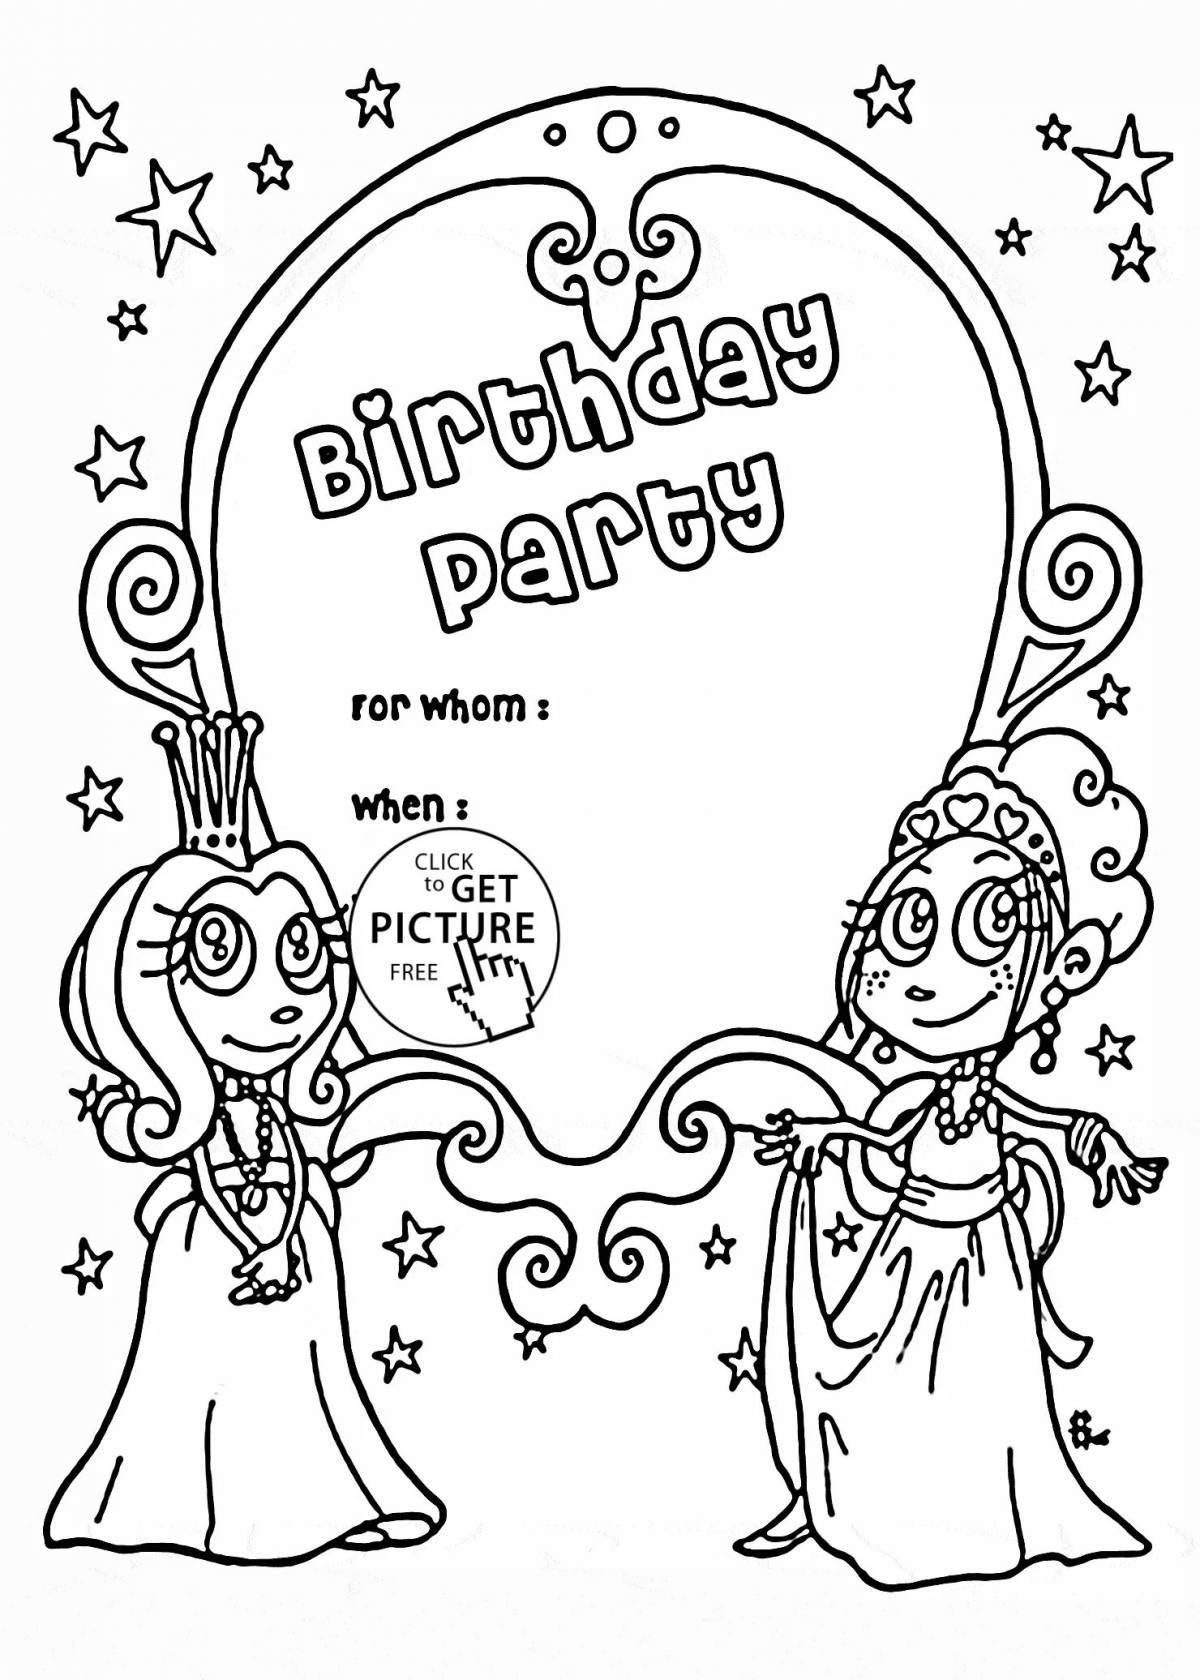 Coloring birthday invitation with colored highlights